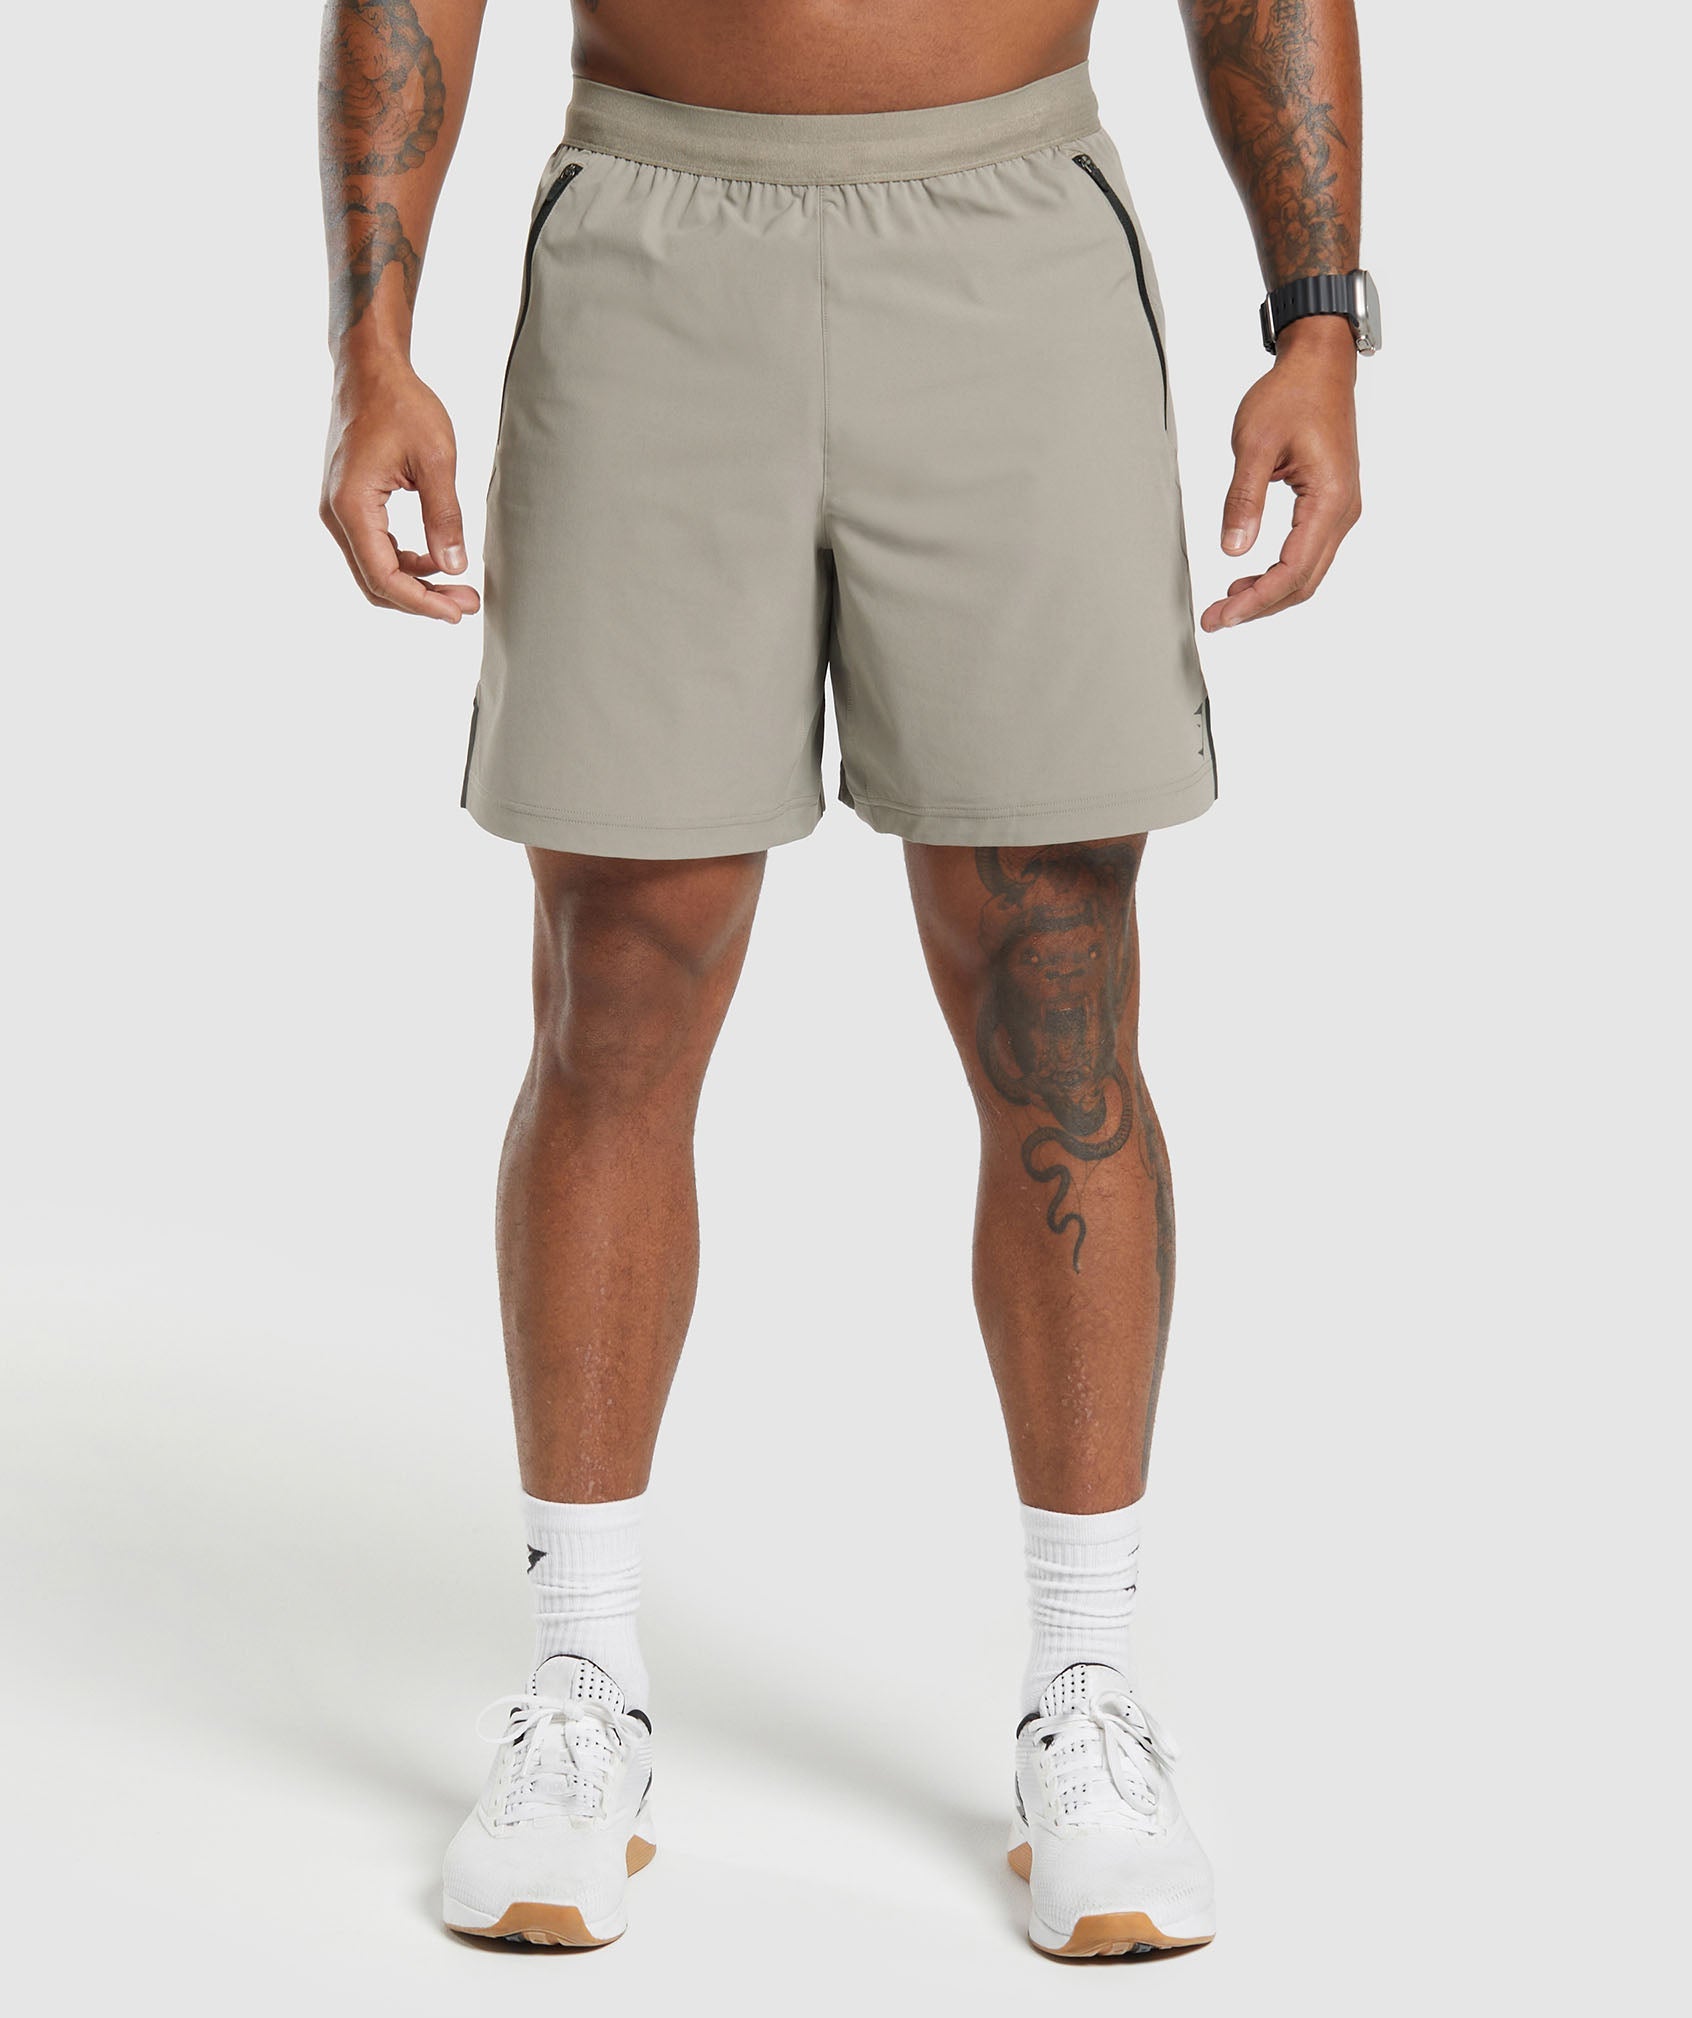 Apex 7" Hybrid Shorts in Linen Brown - view 1